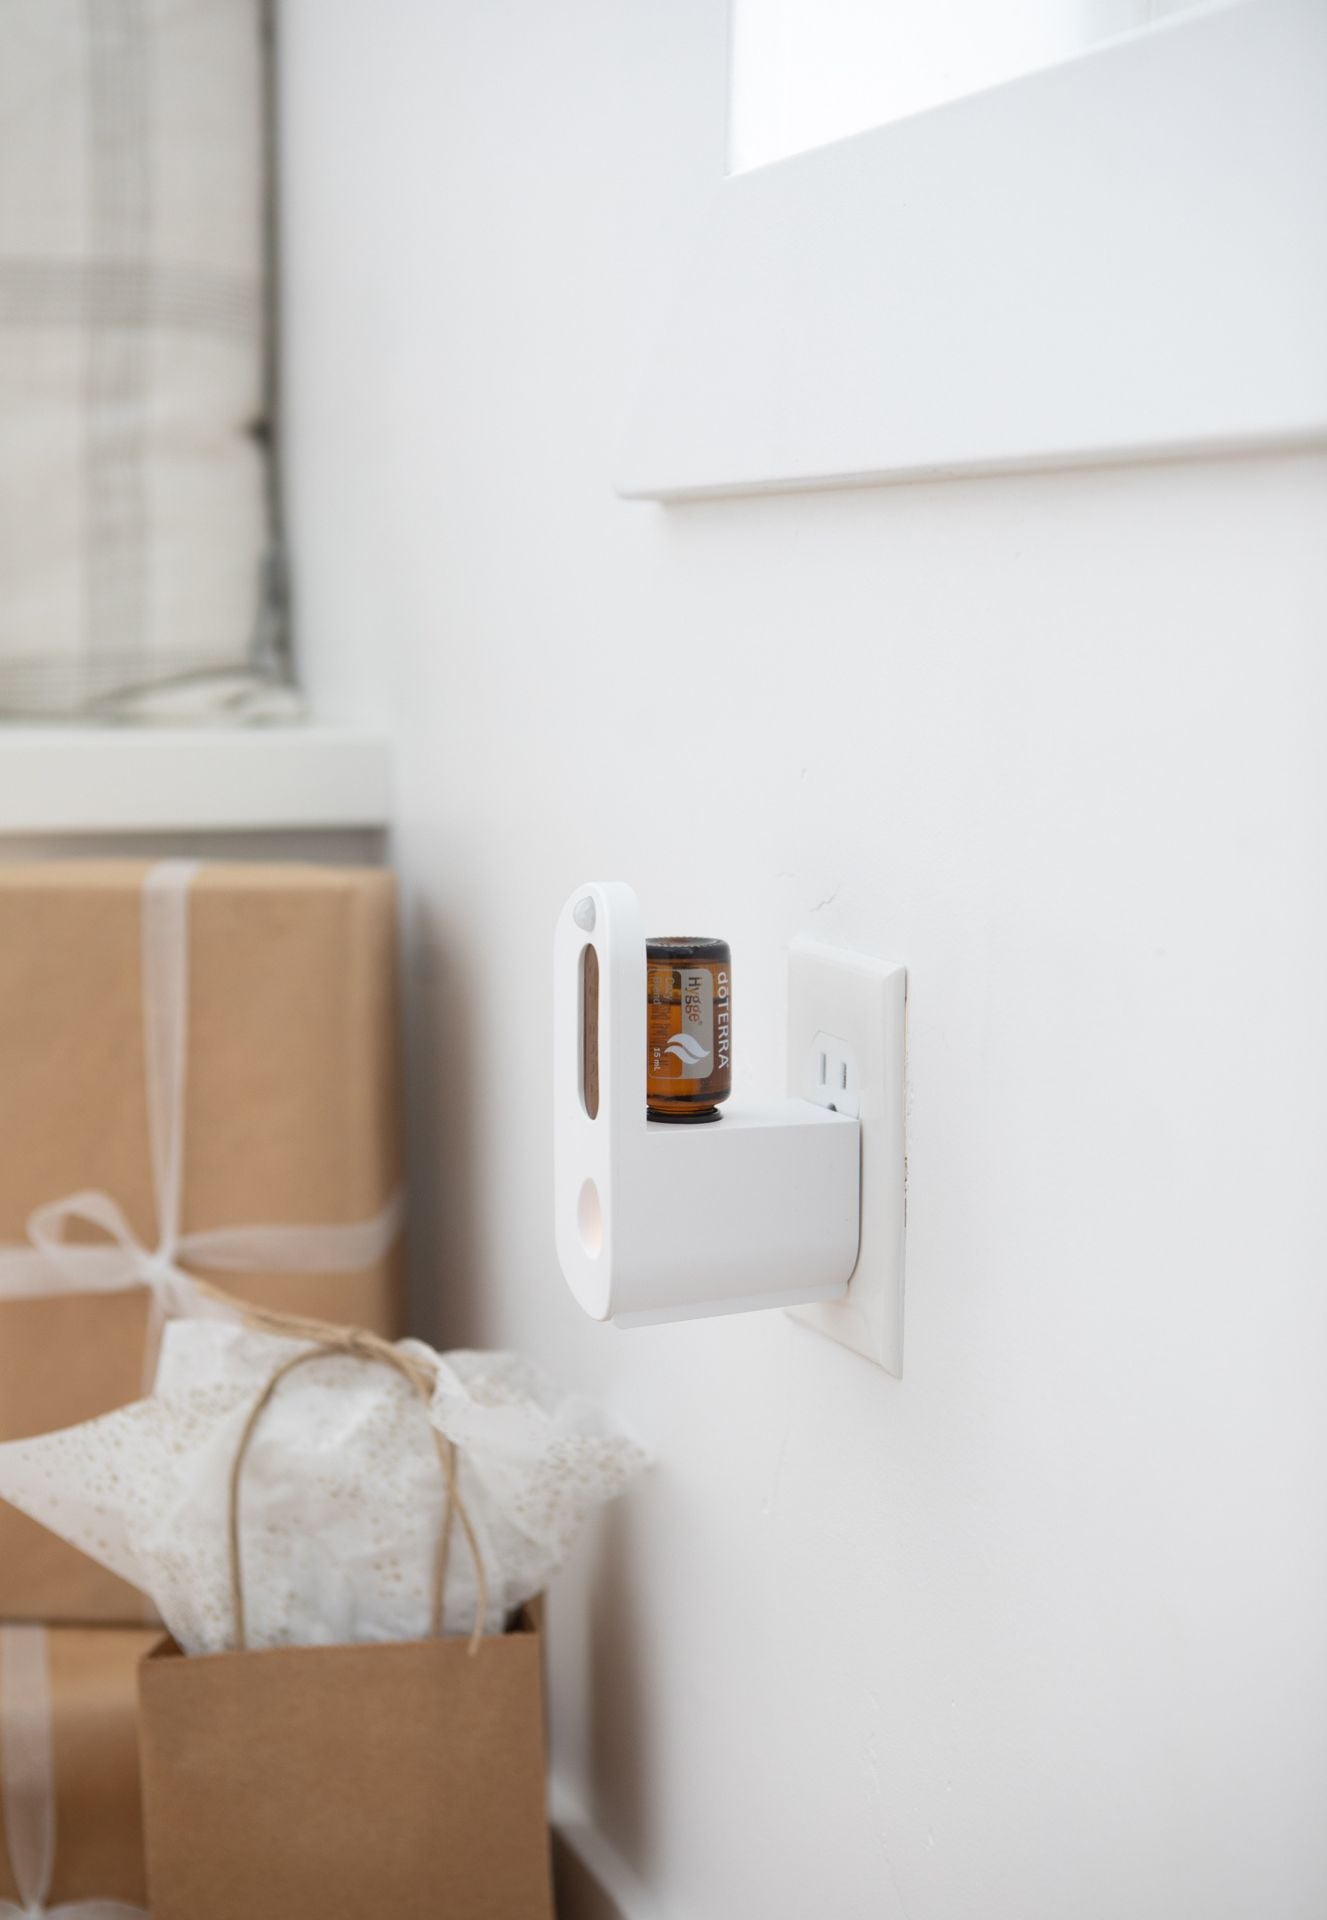 doTERRA Myst Wall Plug Diffuser with Hygge